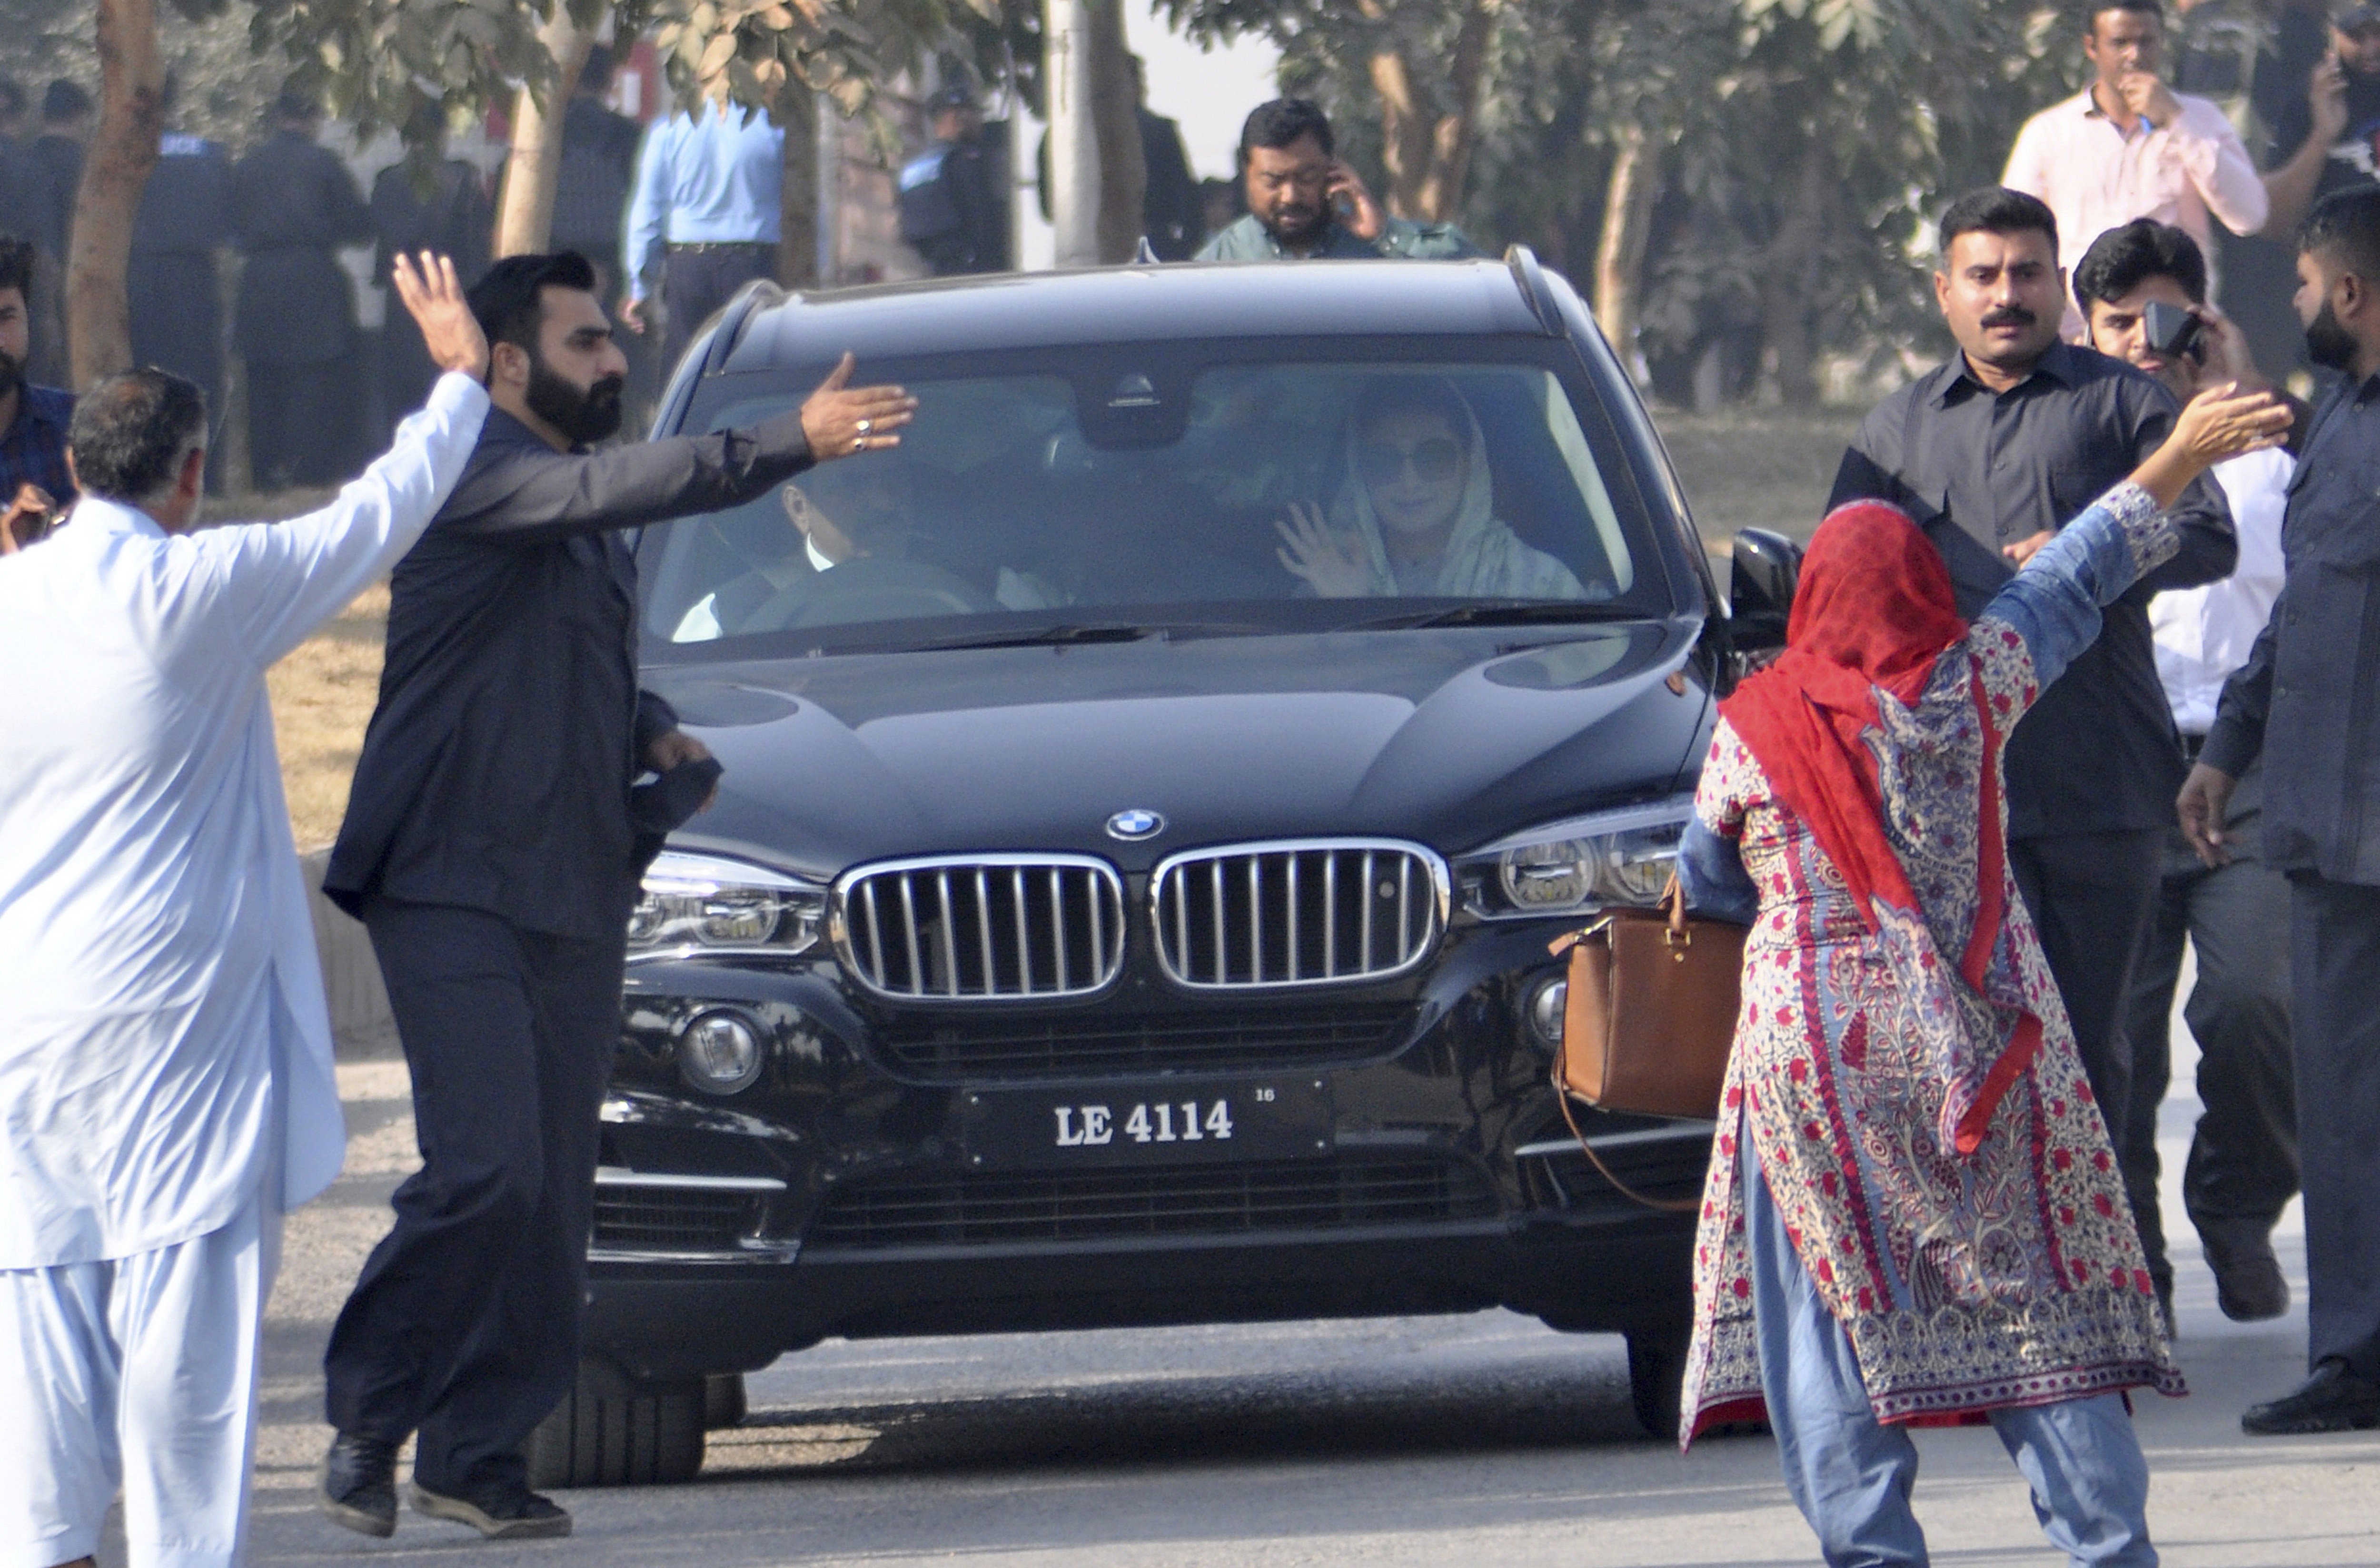 Maryam Nawaz, daughter of former Prime Minister Nawaz Sharif, waves upon her arrival at an accountability court in Islamabad, Pakistan. Photo: AP